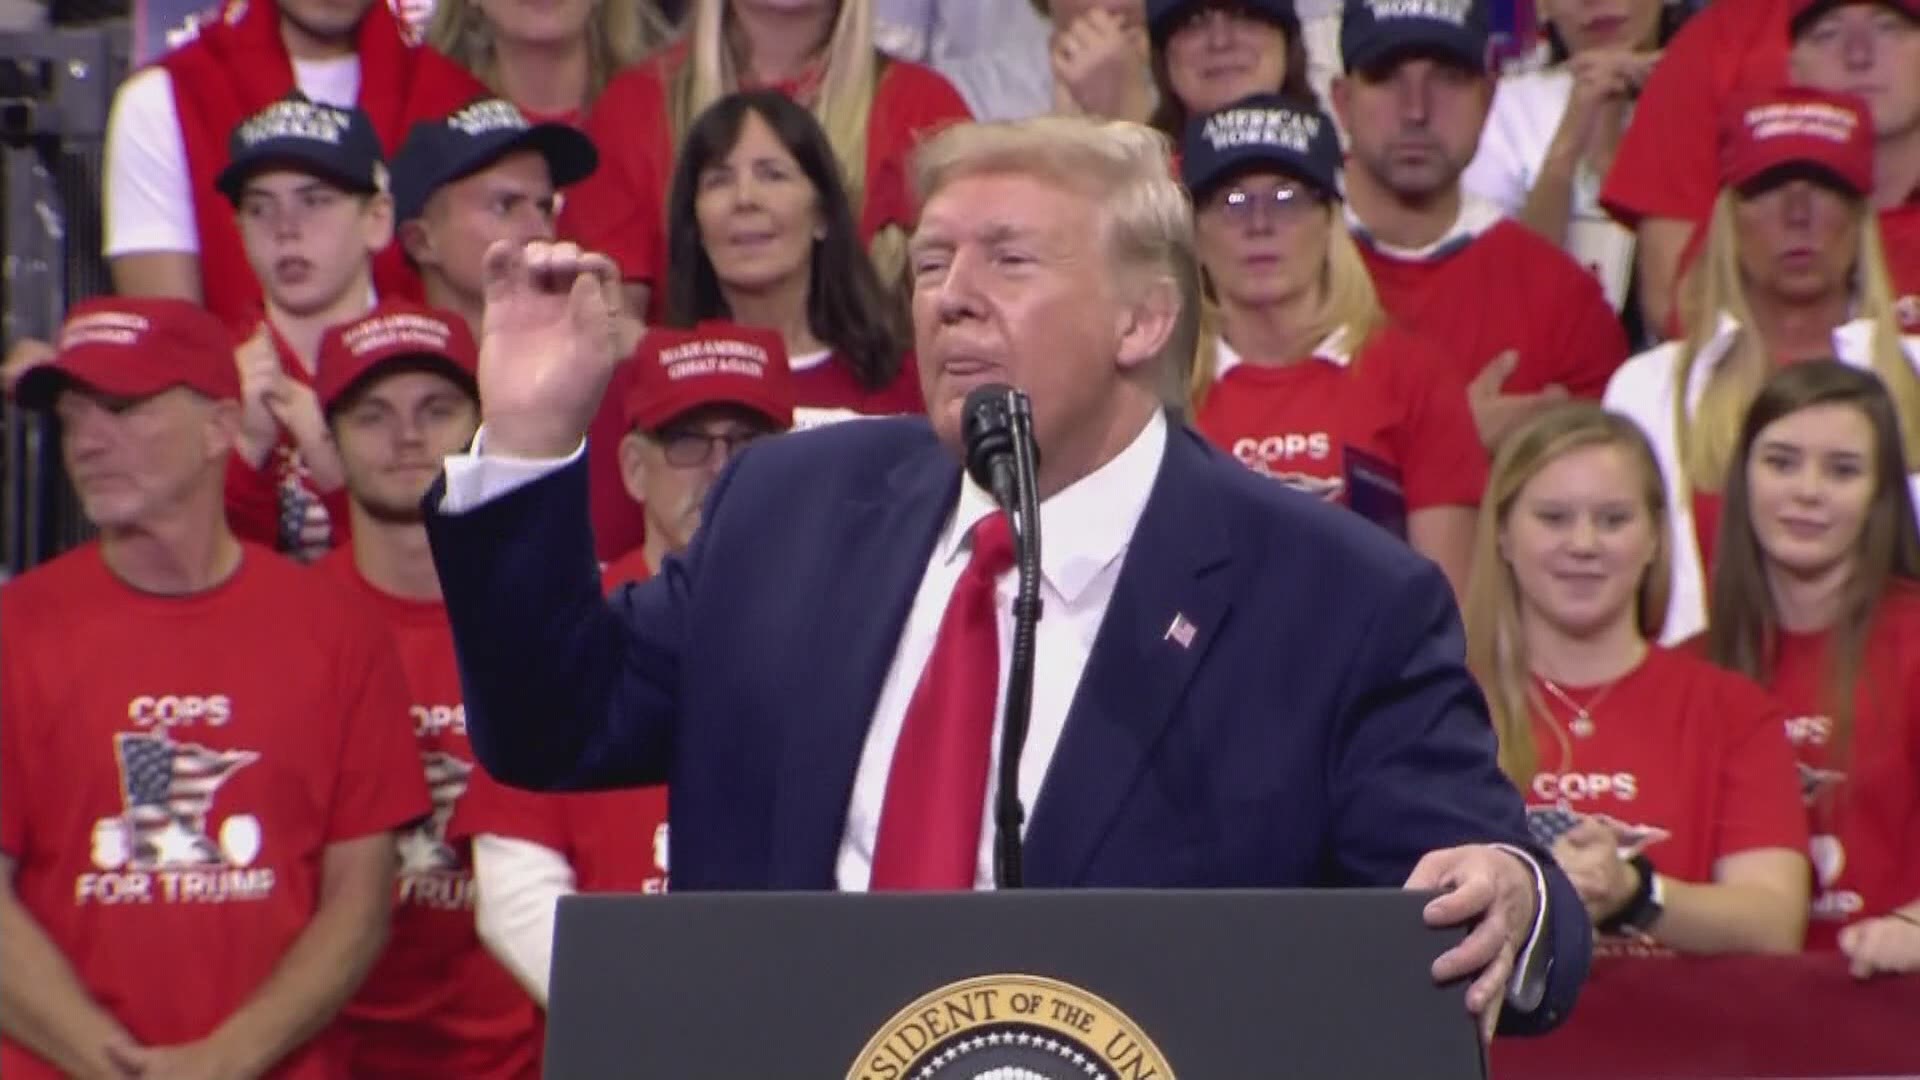 During his Target Center, Minneapolis rally on Oct. 10, 2019, Trump reiterated that his border wall is going up quickly.